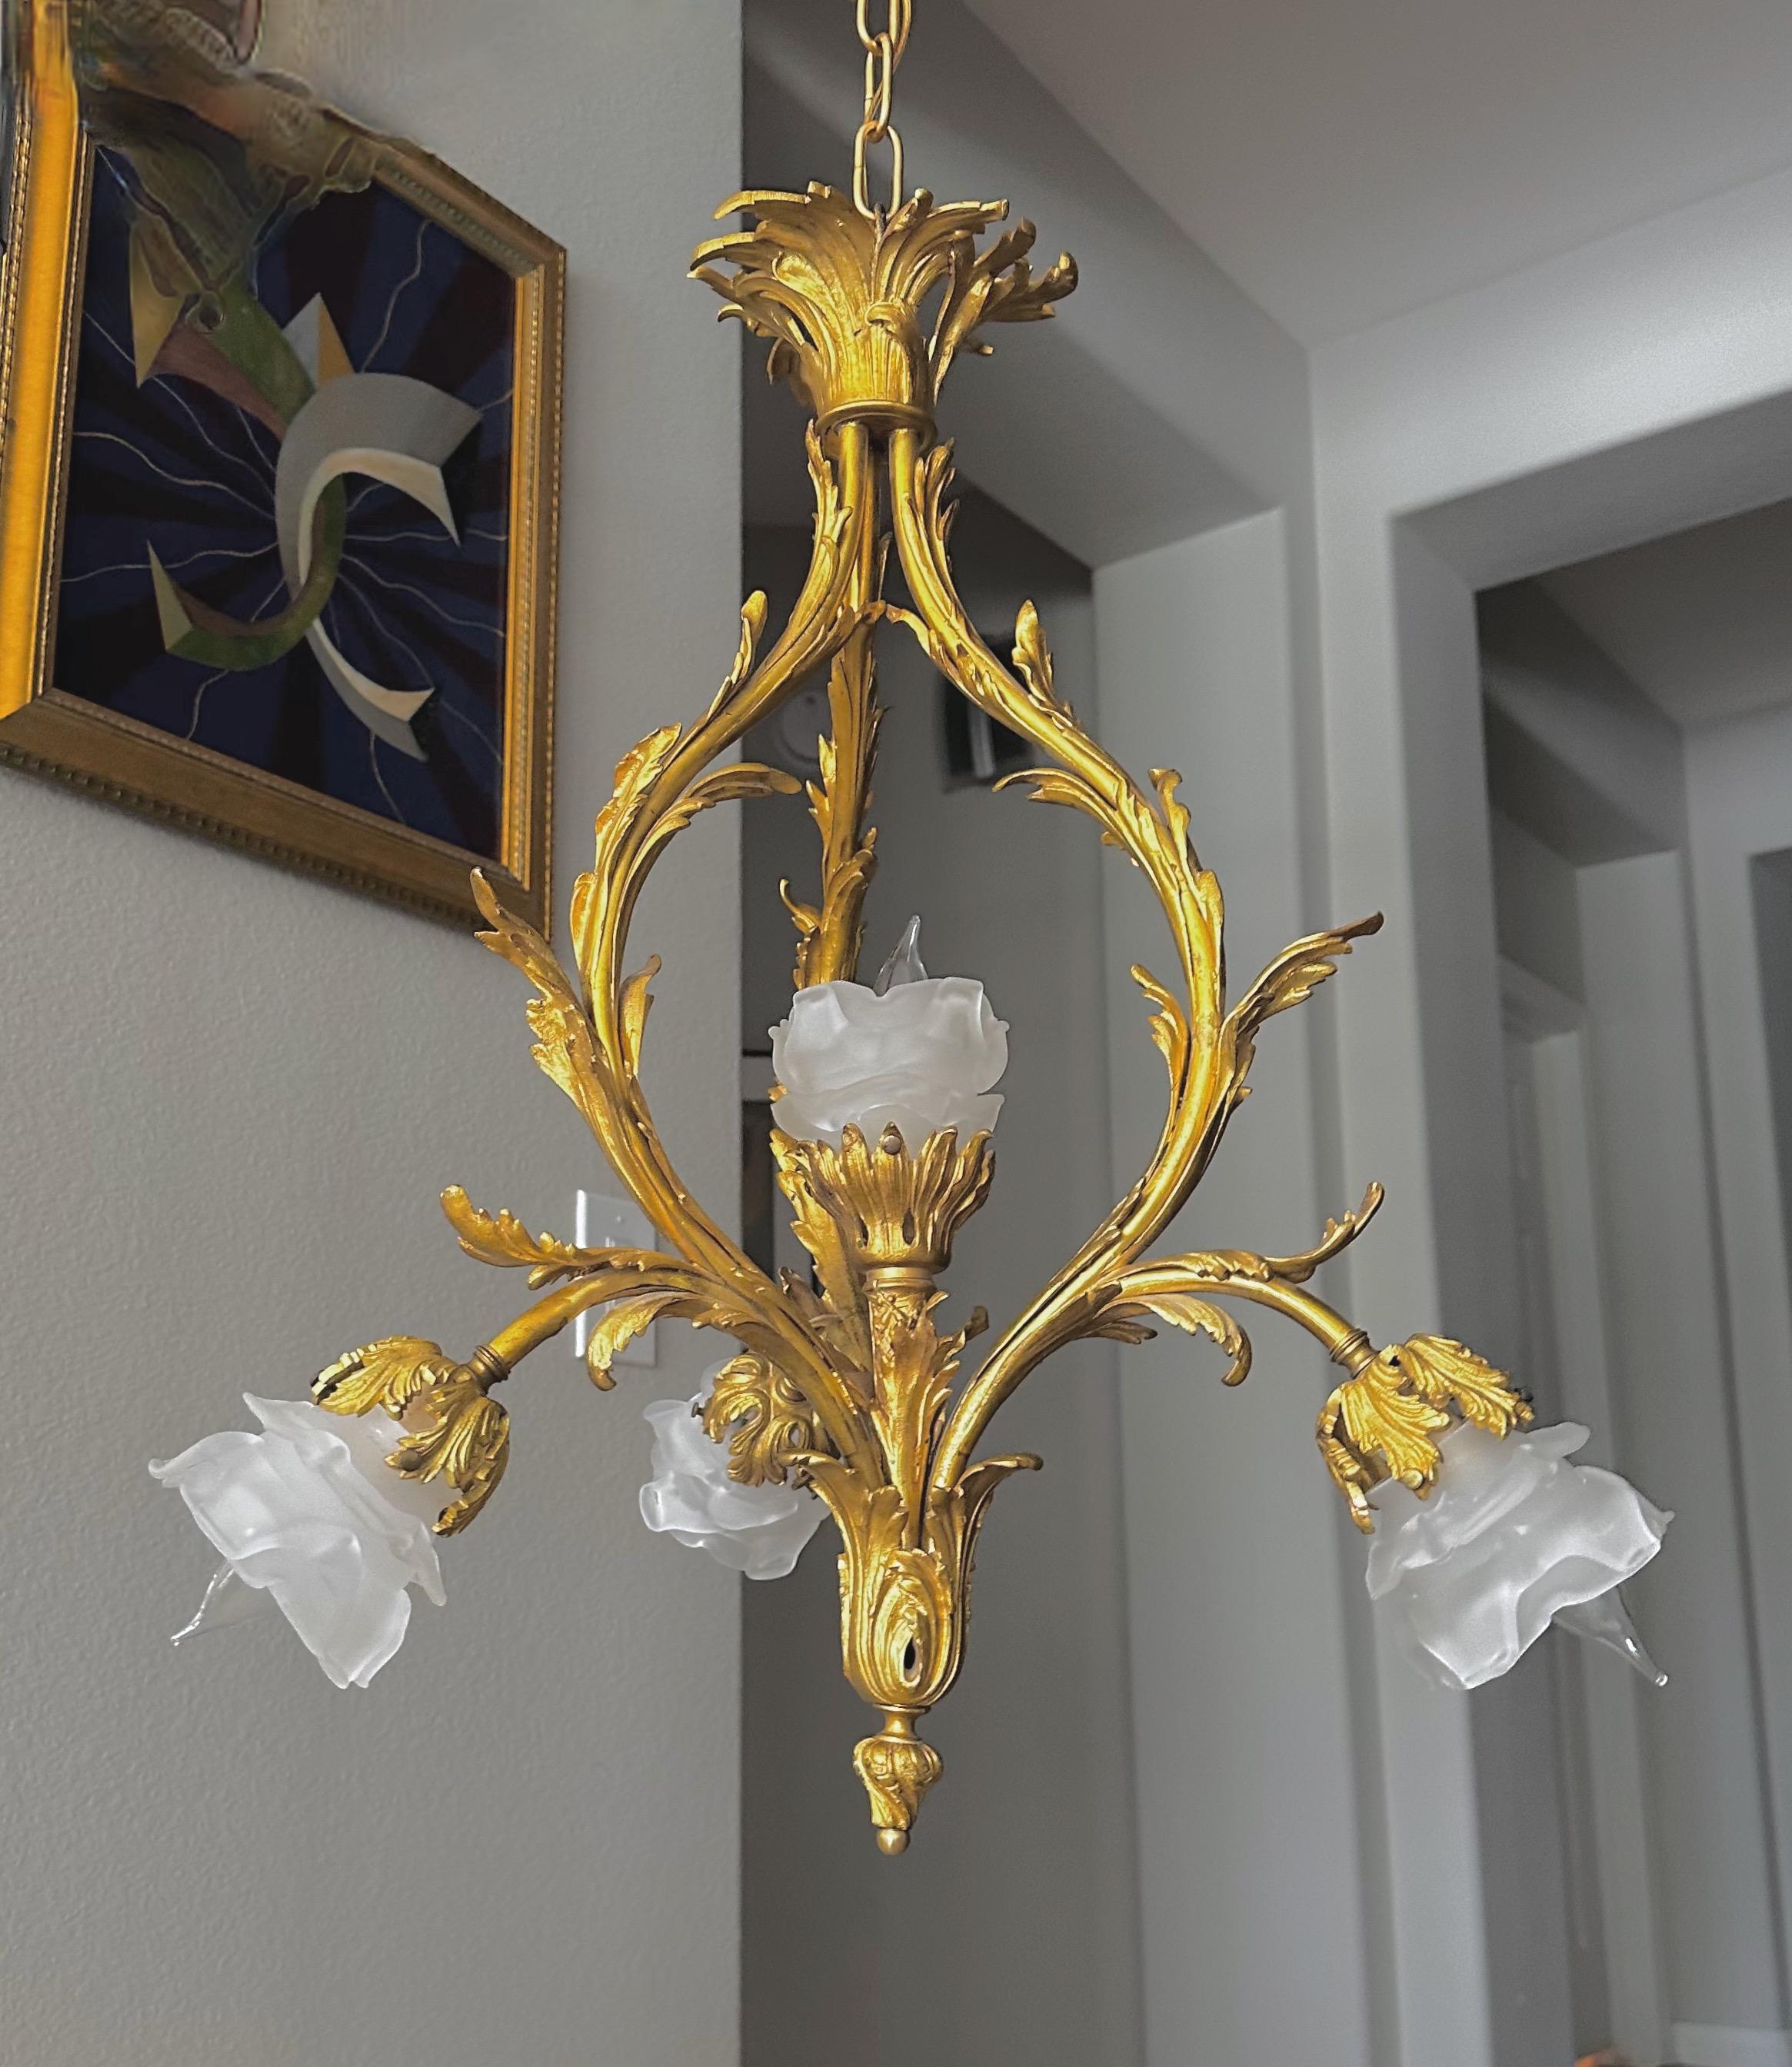 Louis XV style gilt bronze pendant or chandelier with a Rococo influence. Frosted glass rose bud shades on 5 scrolled arms with foliate details. Uses 5 candelabra size bulbs, newly wired. 
Size of fixture 21